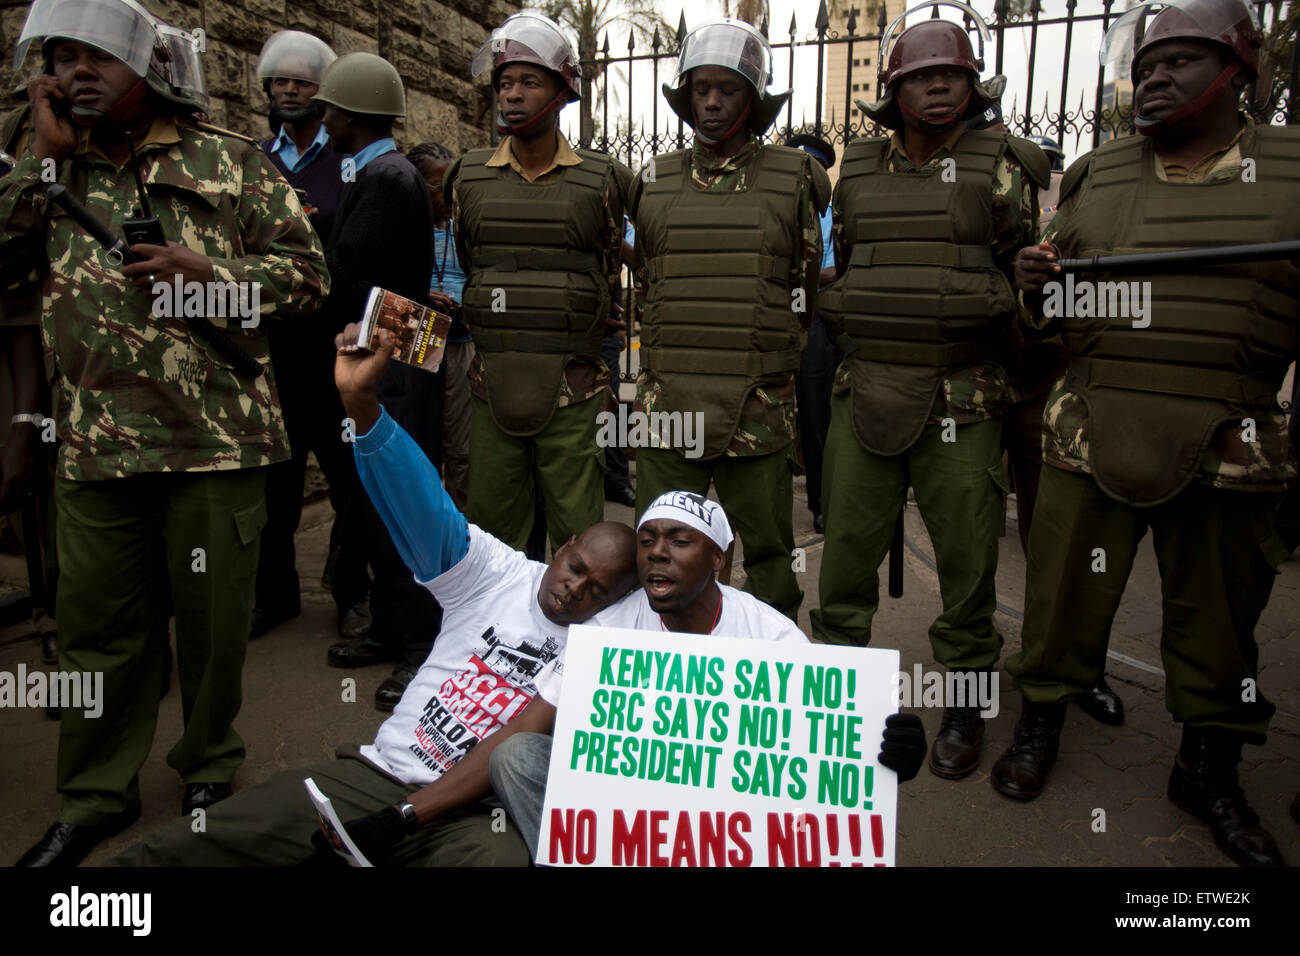 Kenyan protestors during a protest over Members of Parliaments salaries, 11 June 2013 Kenyan MP's have voted to allow them a pay increase in defiance of proposals to cut pay. Kenyan MP's are already one of the higest paid in the world.The MP's voted  for a monthly salary of about $10,000 (£6,540).KAREL PRINSLOO. Stock Photo